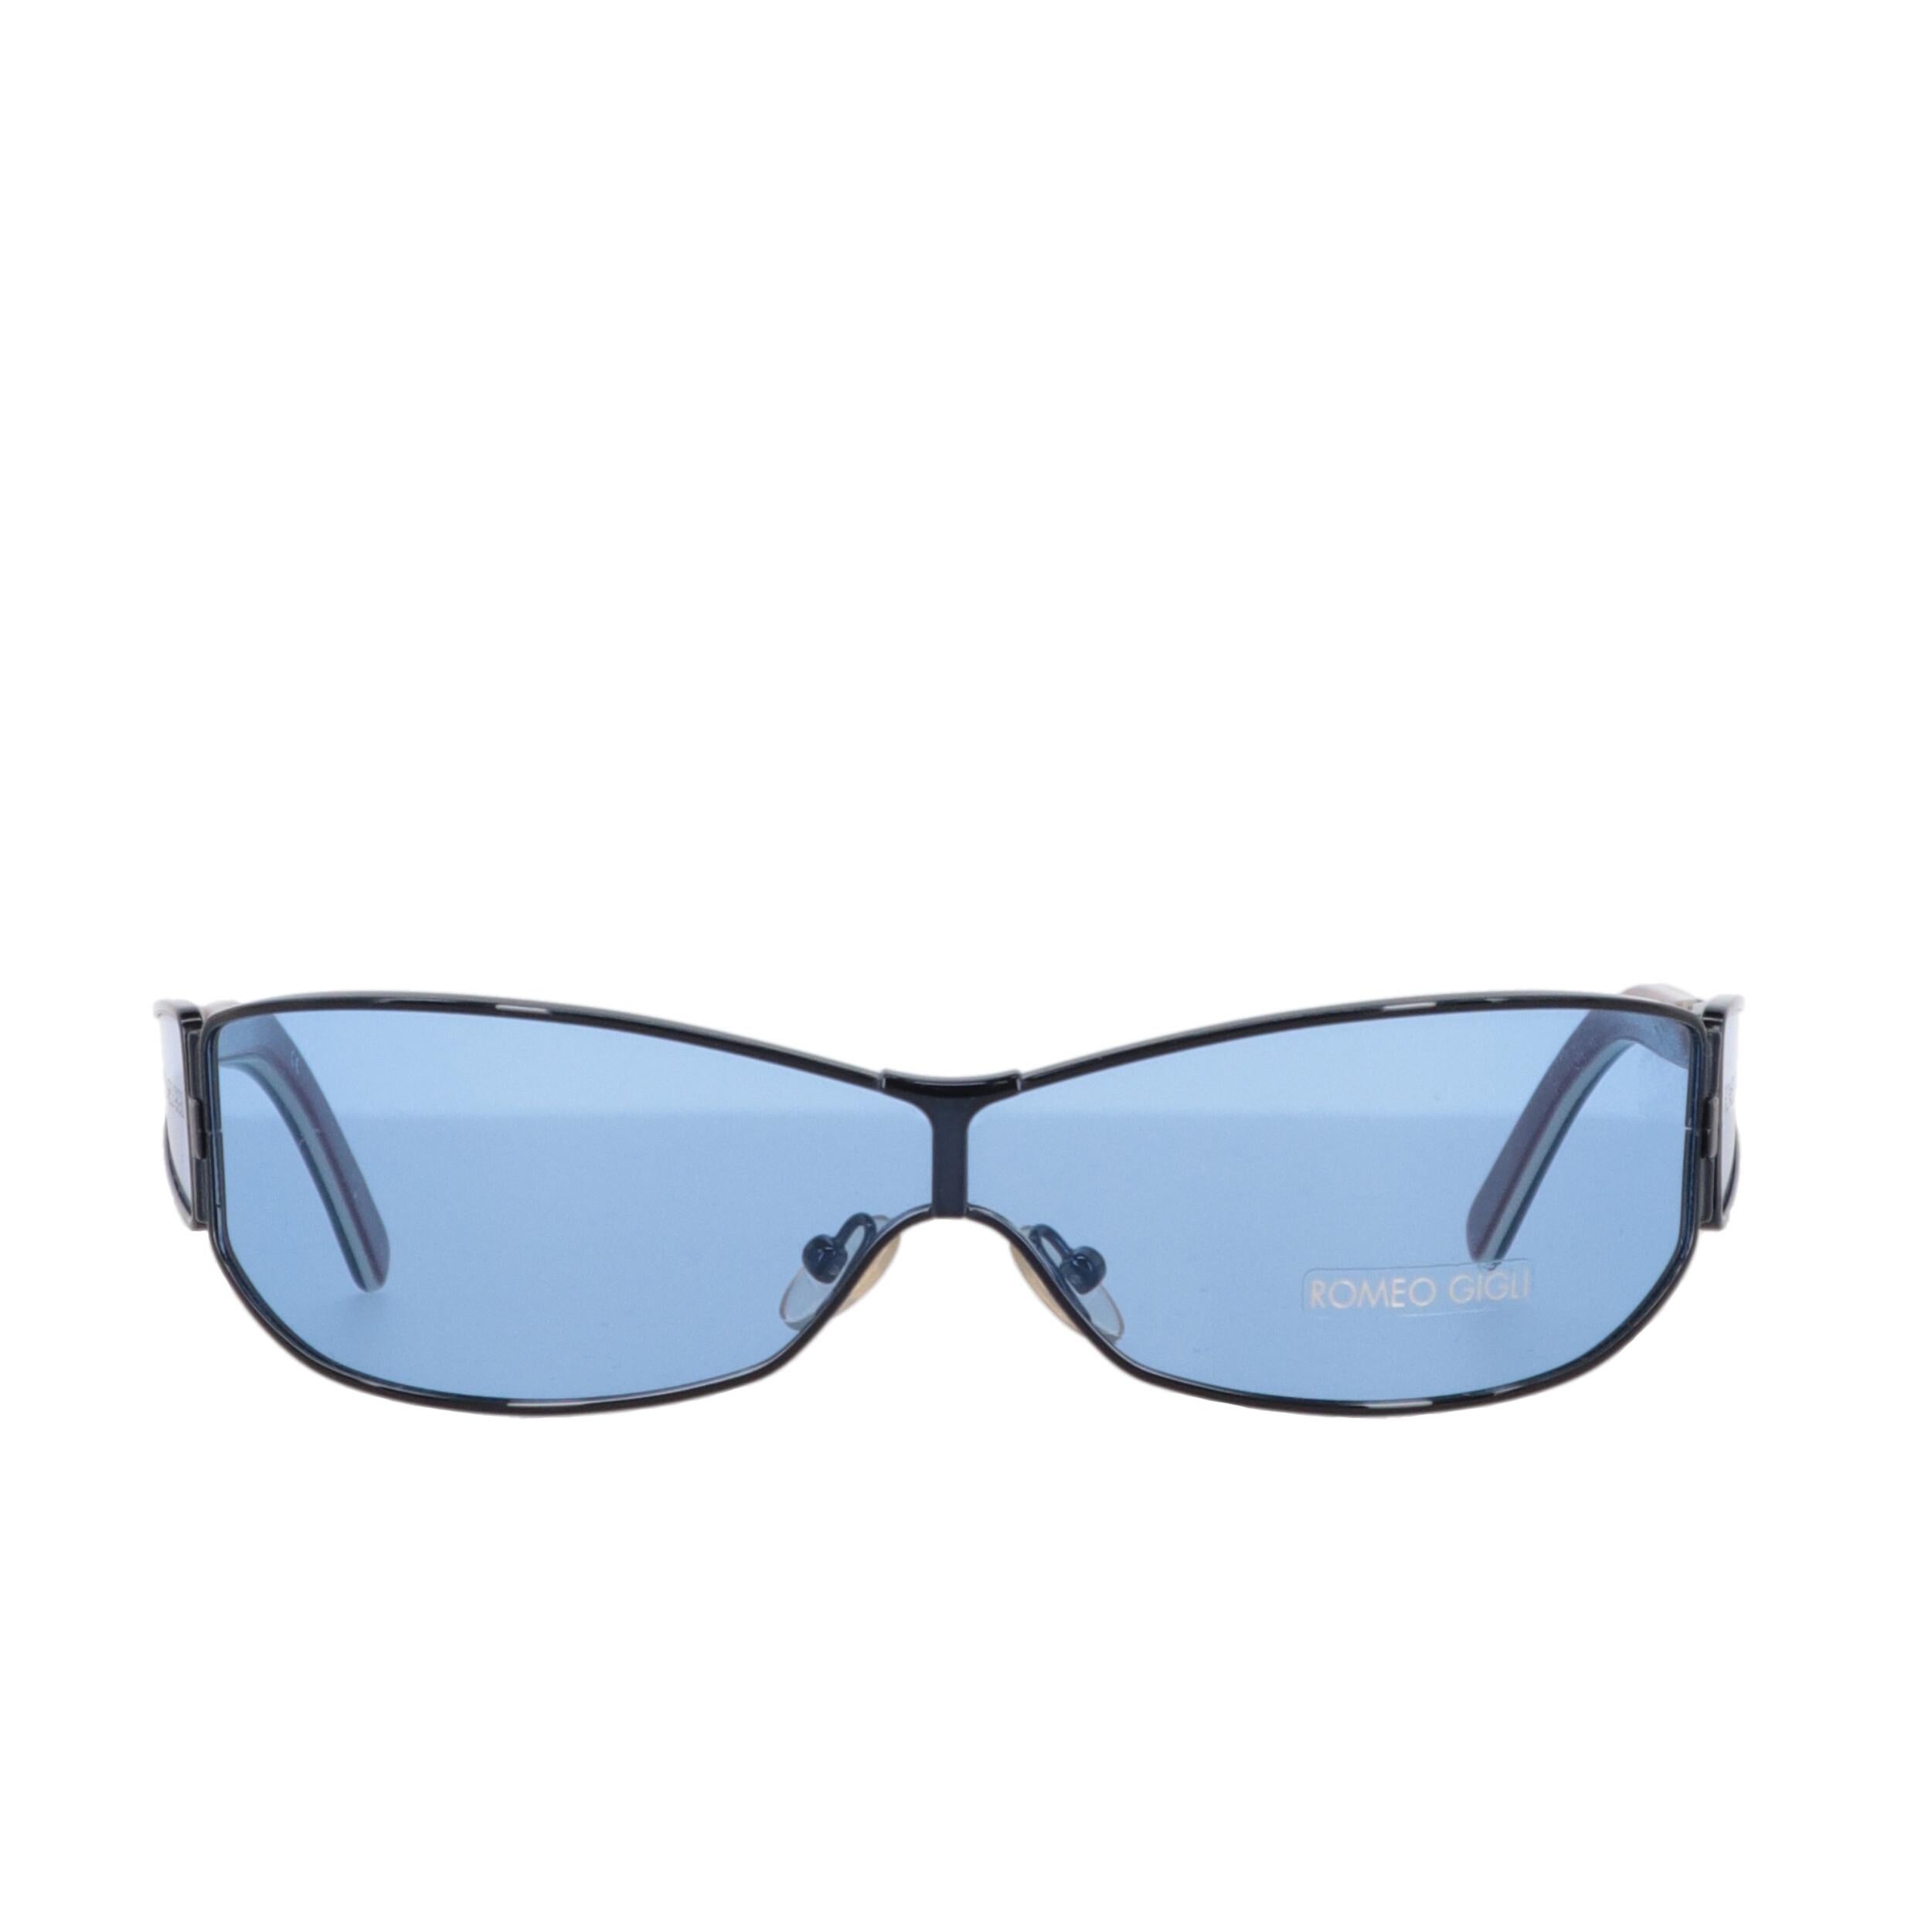 Romeo Gigli light blue sunglasses with dark-tone metal frame and wraparound curved lenses.

Please note, this item cannot be shipped to the US.

Years: 90s

Made in Italy

Width: 13 cm
Height: 3,5 cm